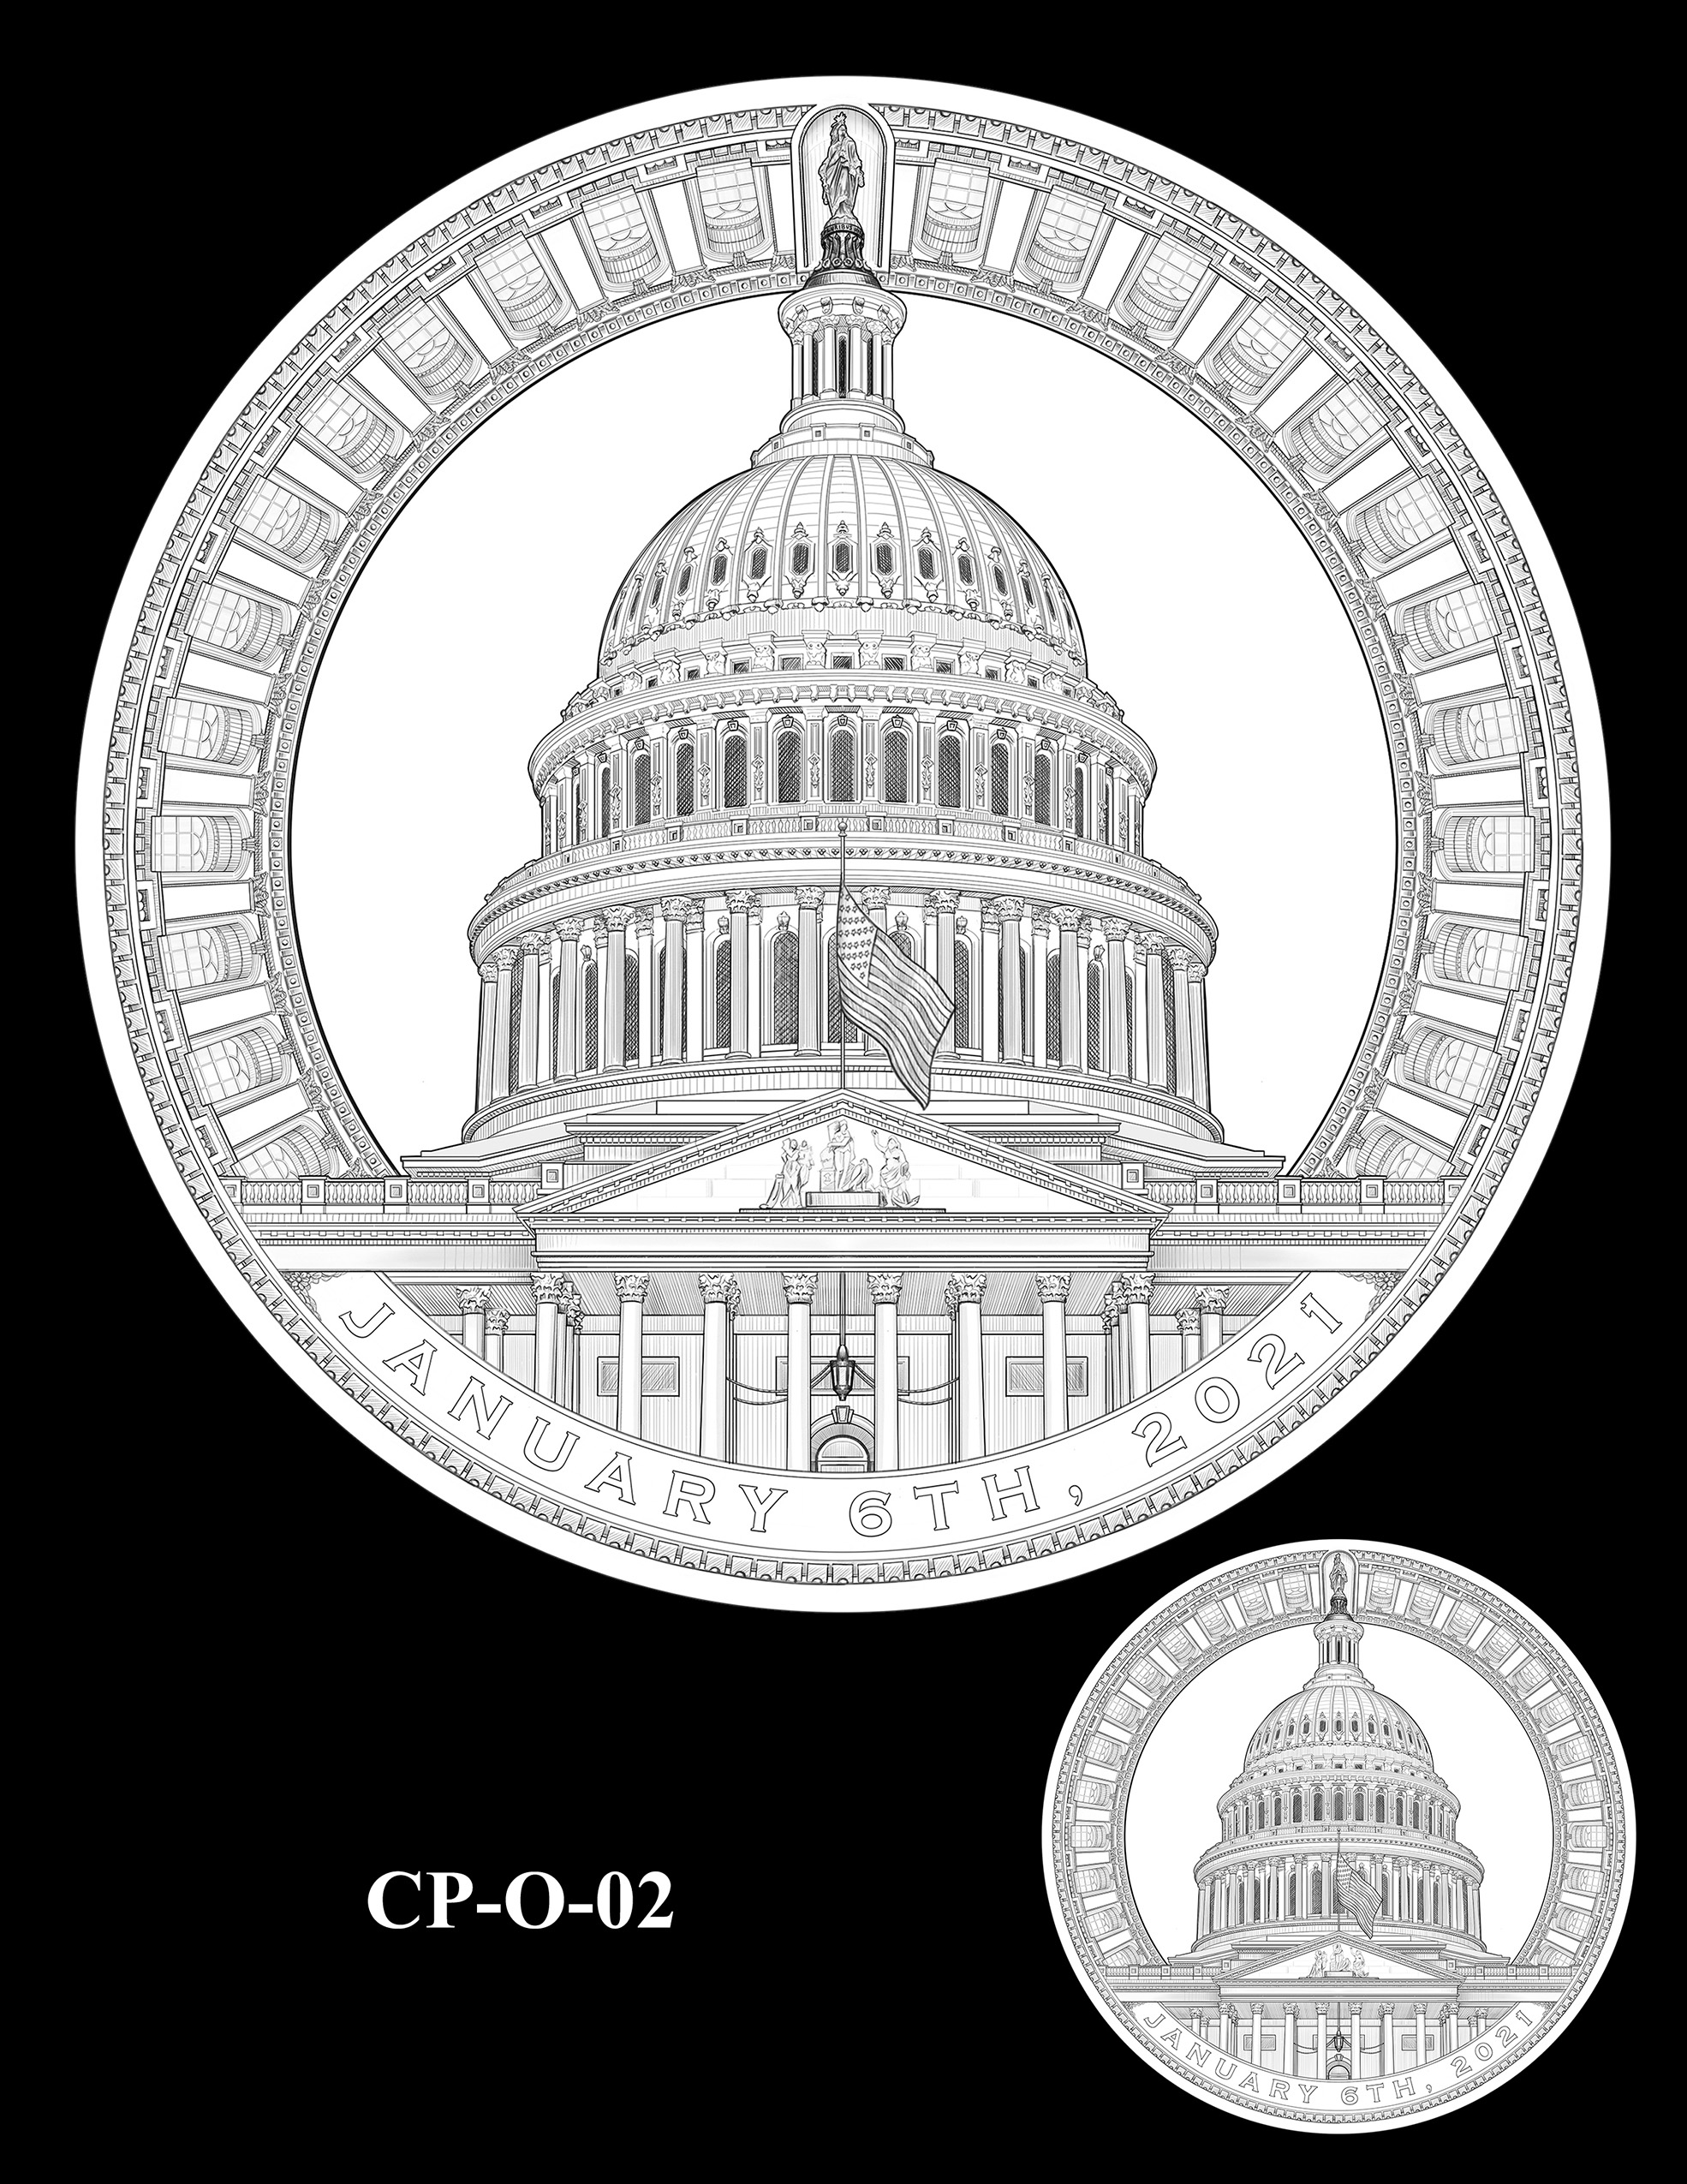 CP-O-02 -- Congressional Gold Medal for Those Who Protected the U.S. Capitol on January 6th 2021